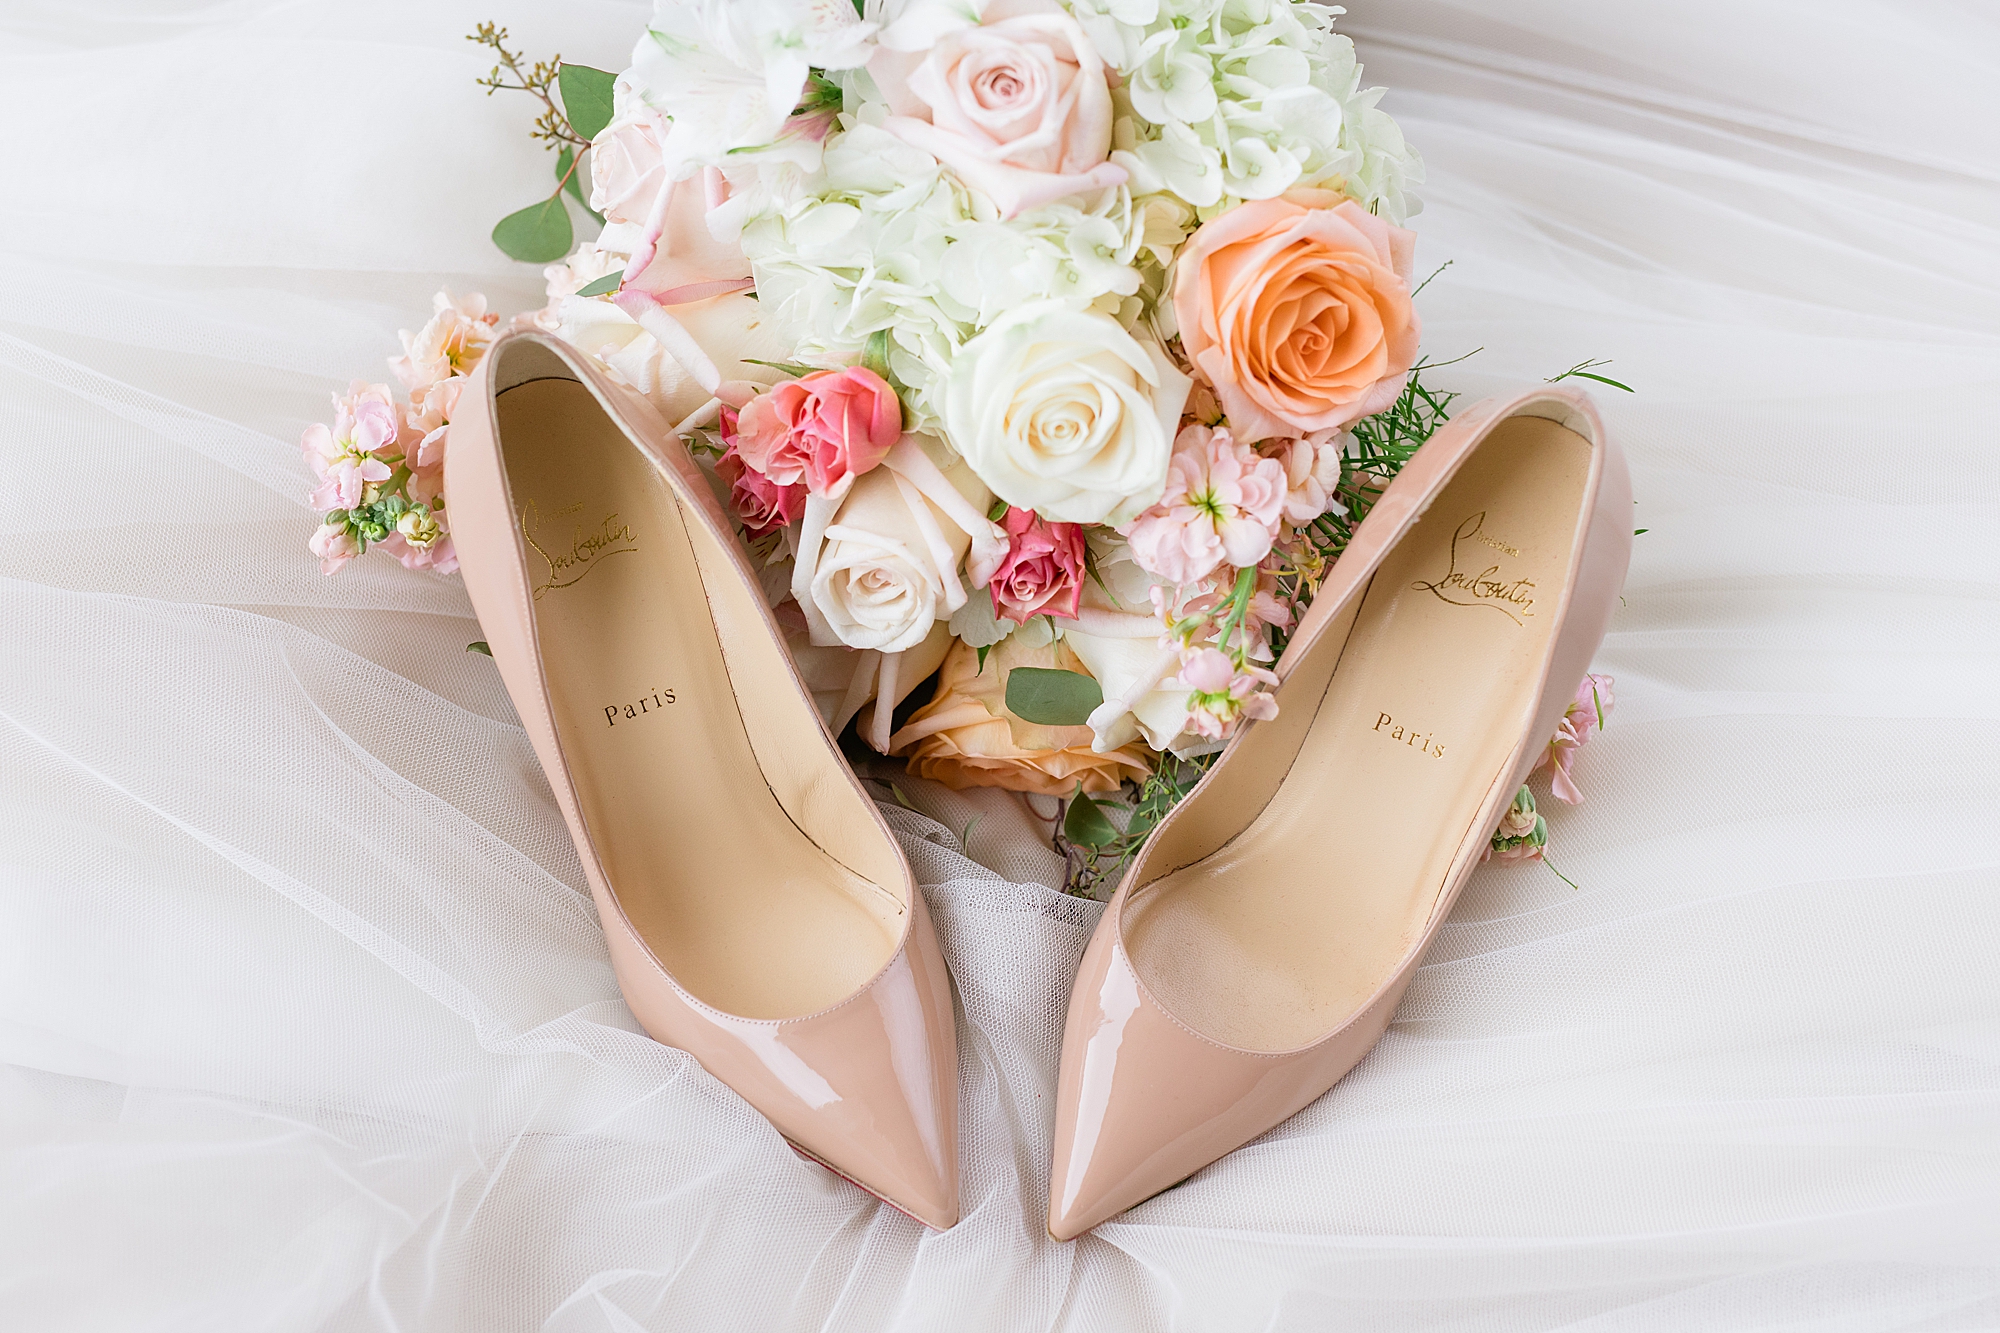 An intimate and heartwarming summer Metro Detroit micro wedding in Birmingham, Michigan by Breanne Rochelle Photography. Breanne is a Michigan based wedding photography available for destination weddings capturing timeless wedding photos for couples in love.